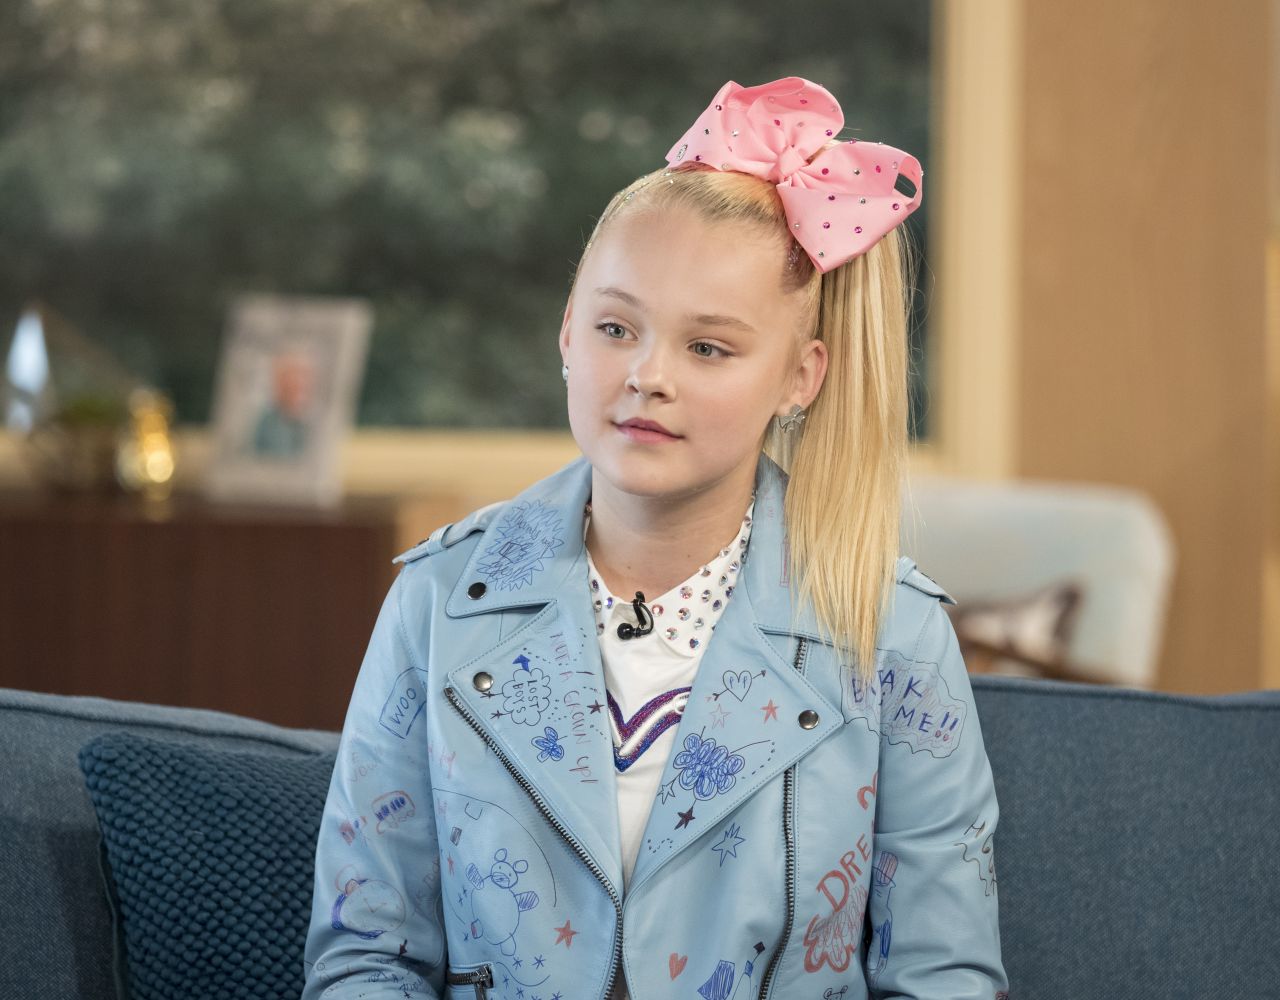 jojo-siwa-appeared-on-this-morning-tv-show-in-london-07-27-2017-6.